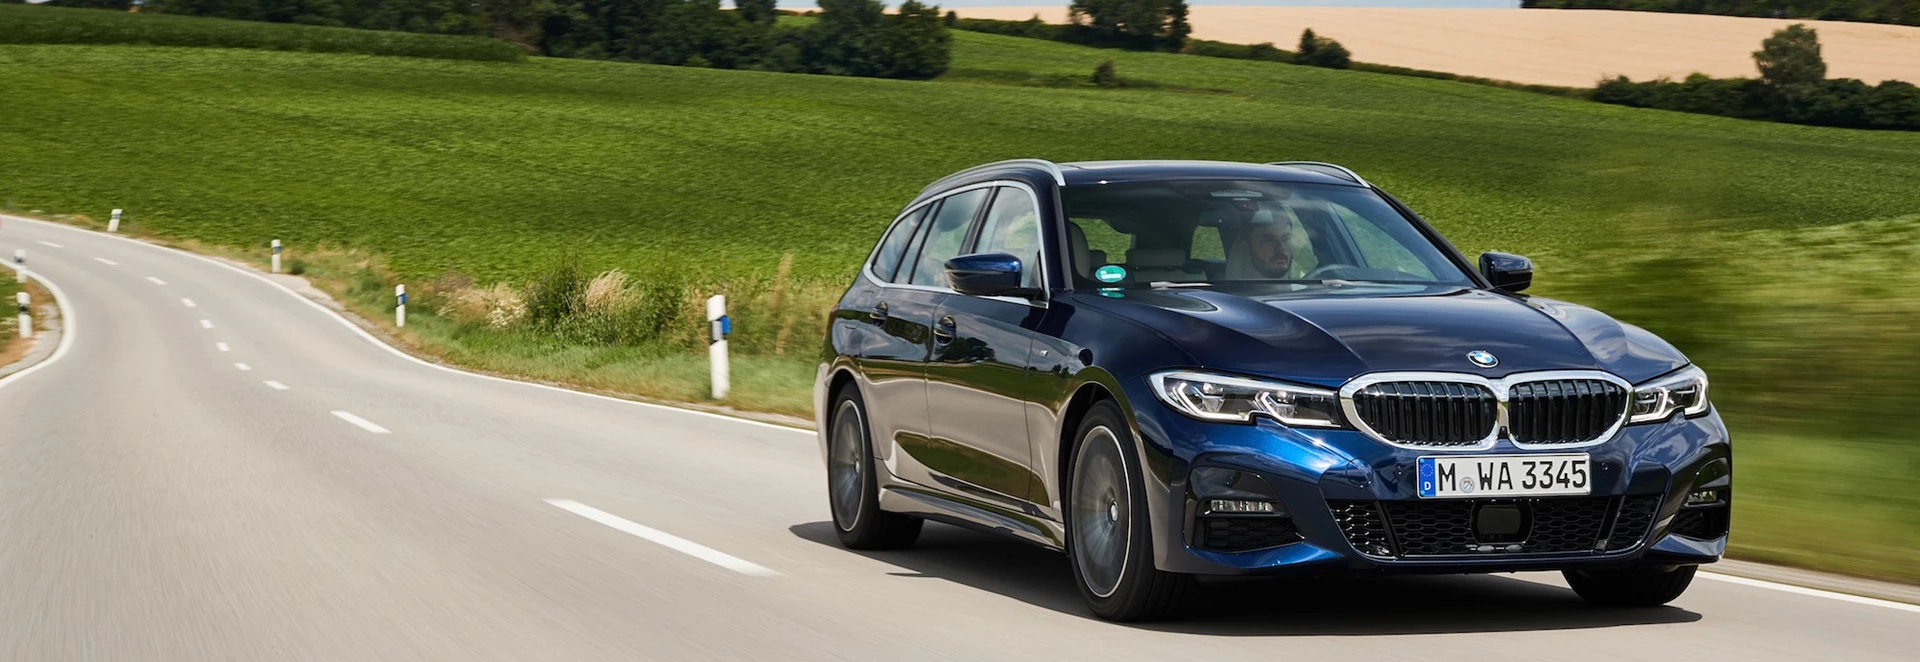 BMW's 3 Series Touring is going hybrid, but what else is new?